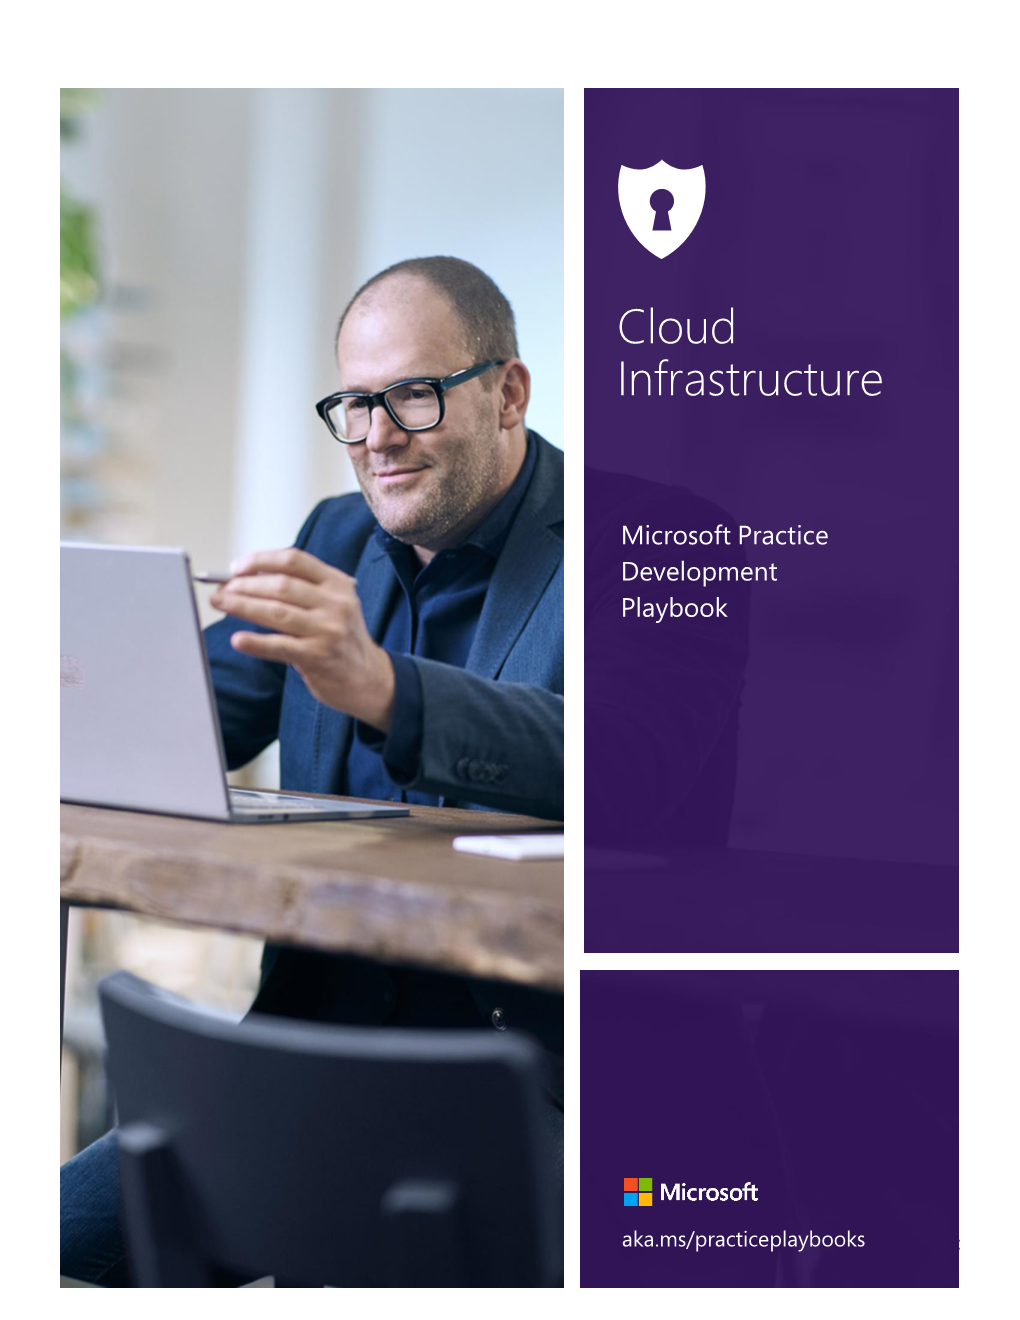 Cloud Infrastructure Playbook Summary